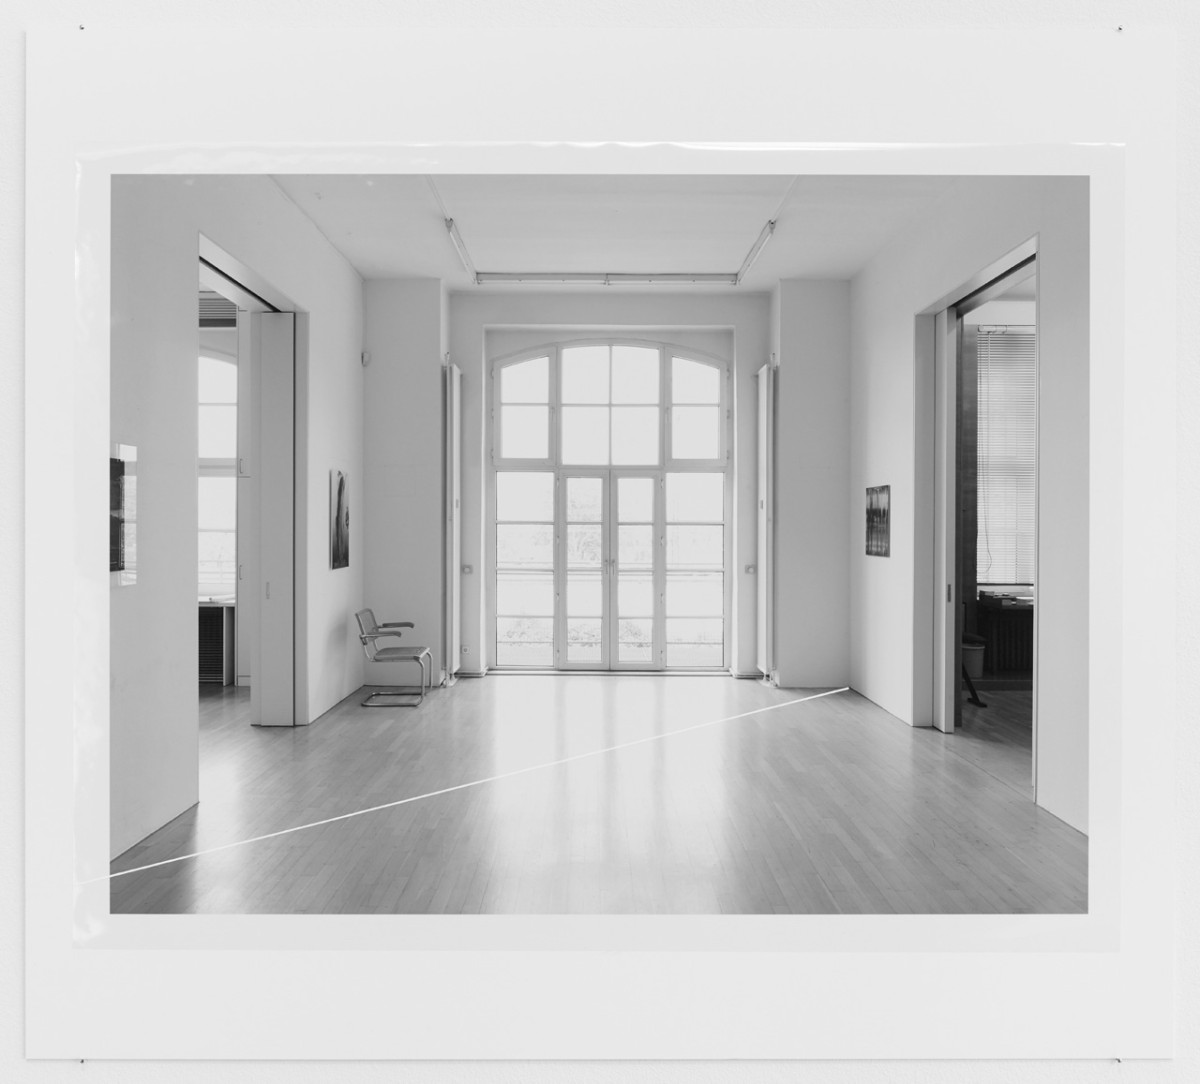 Case Study #1: Notations for Galerie Heiner Friedrich, Koln, 1976 (not executed) by Fred Sandback (2016) - Black and white inkjet print on archival paper mounted on aluminium, acryl on transparency